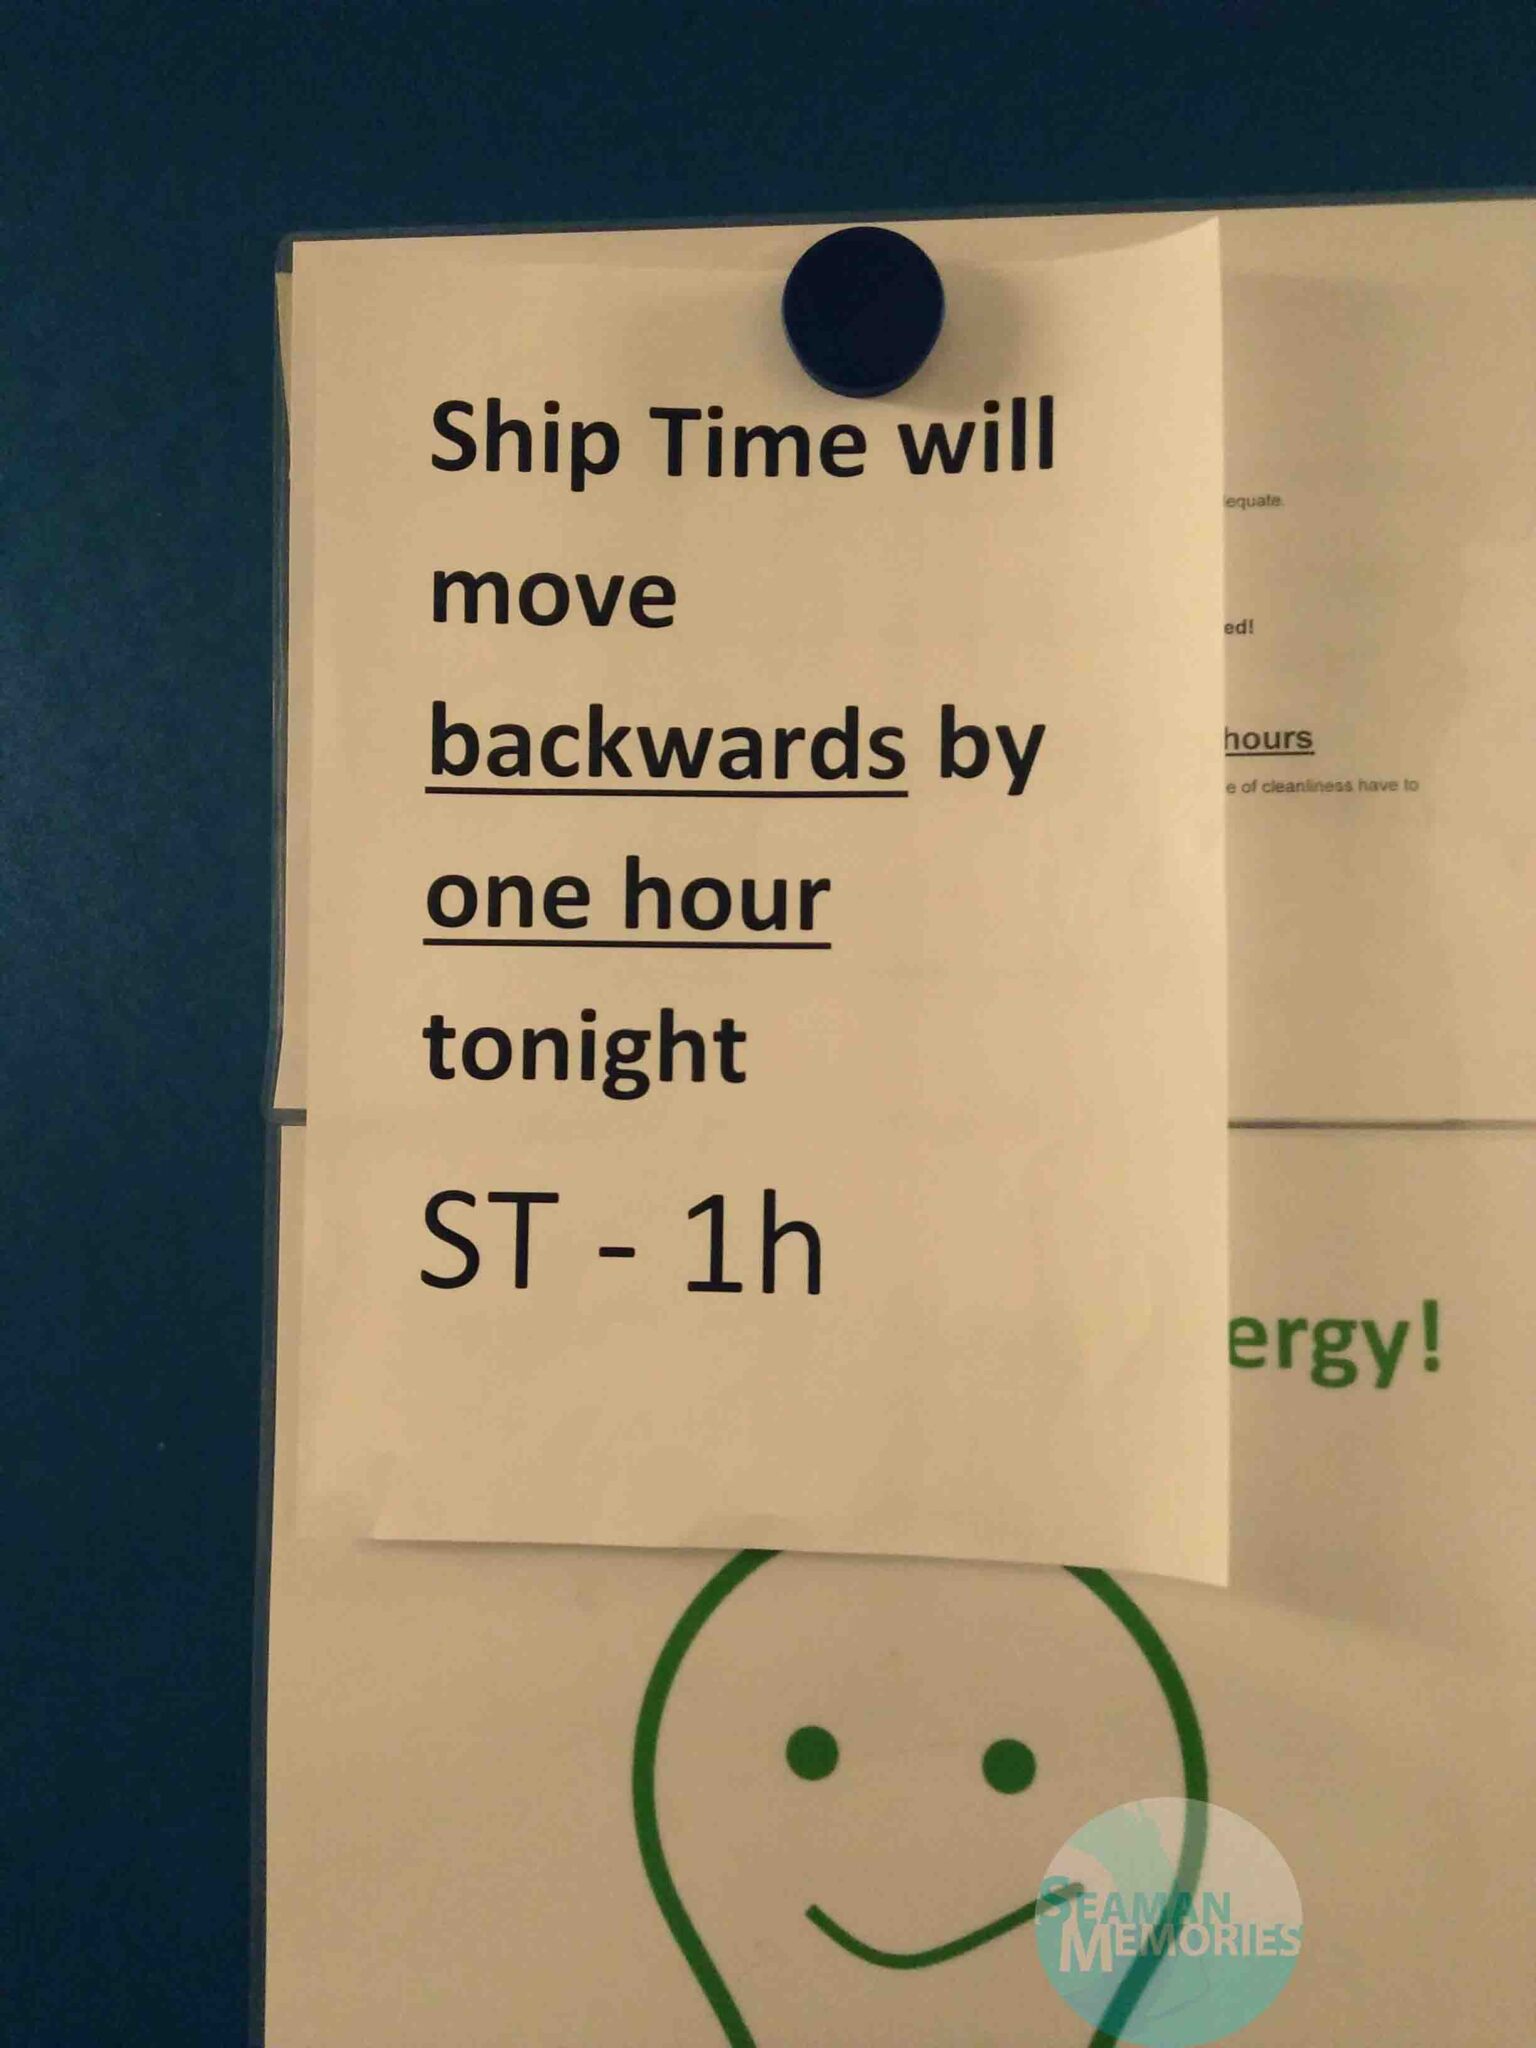 A poster announcement that the ship time will move backwards by 1 hour tonight.